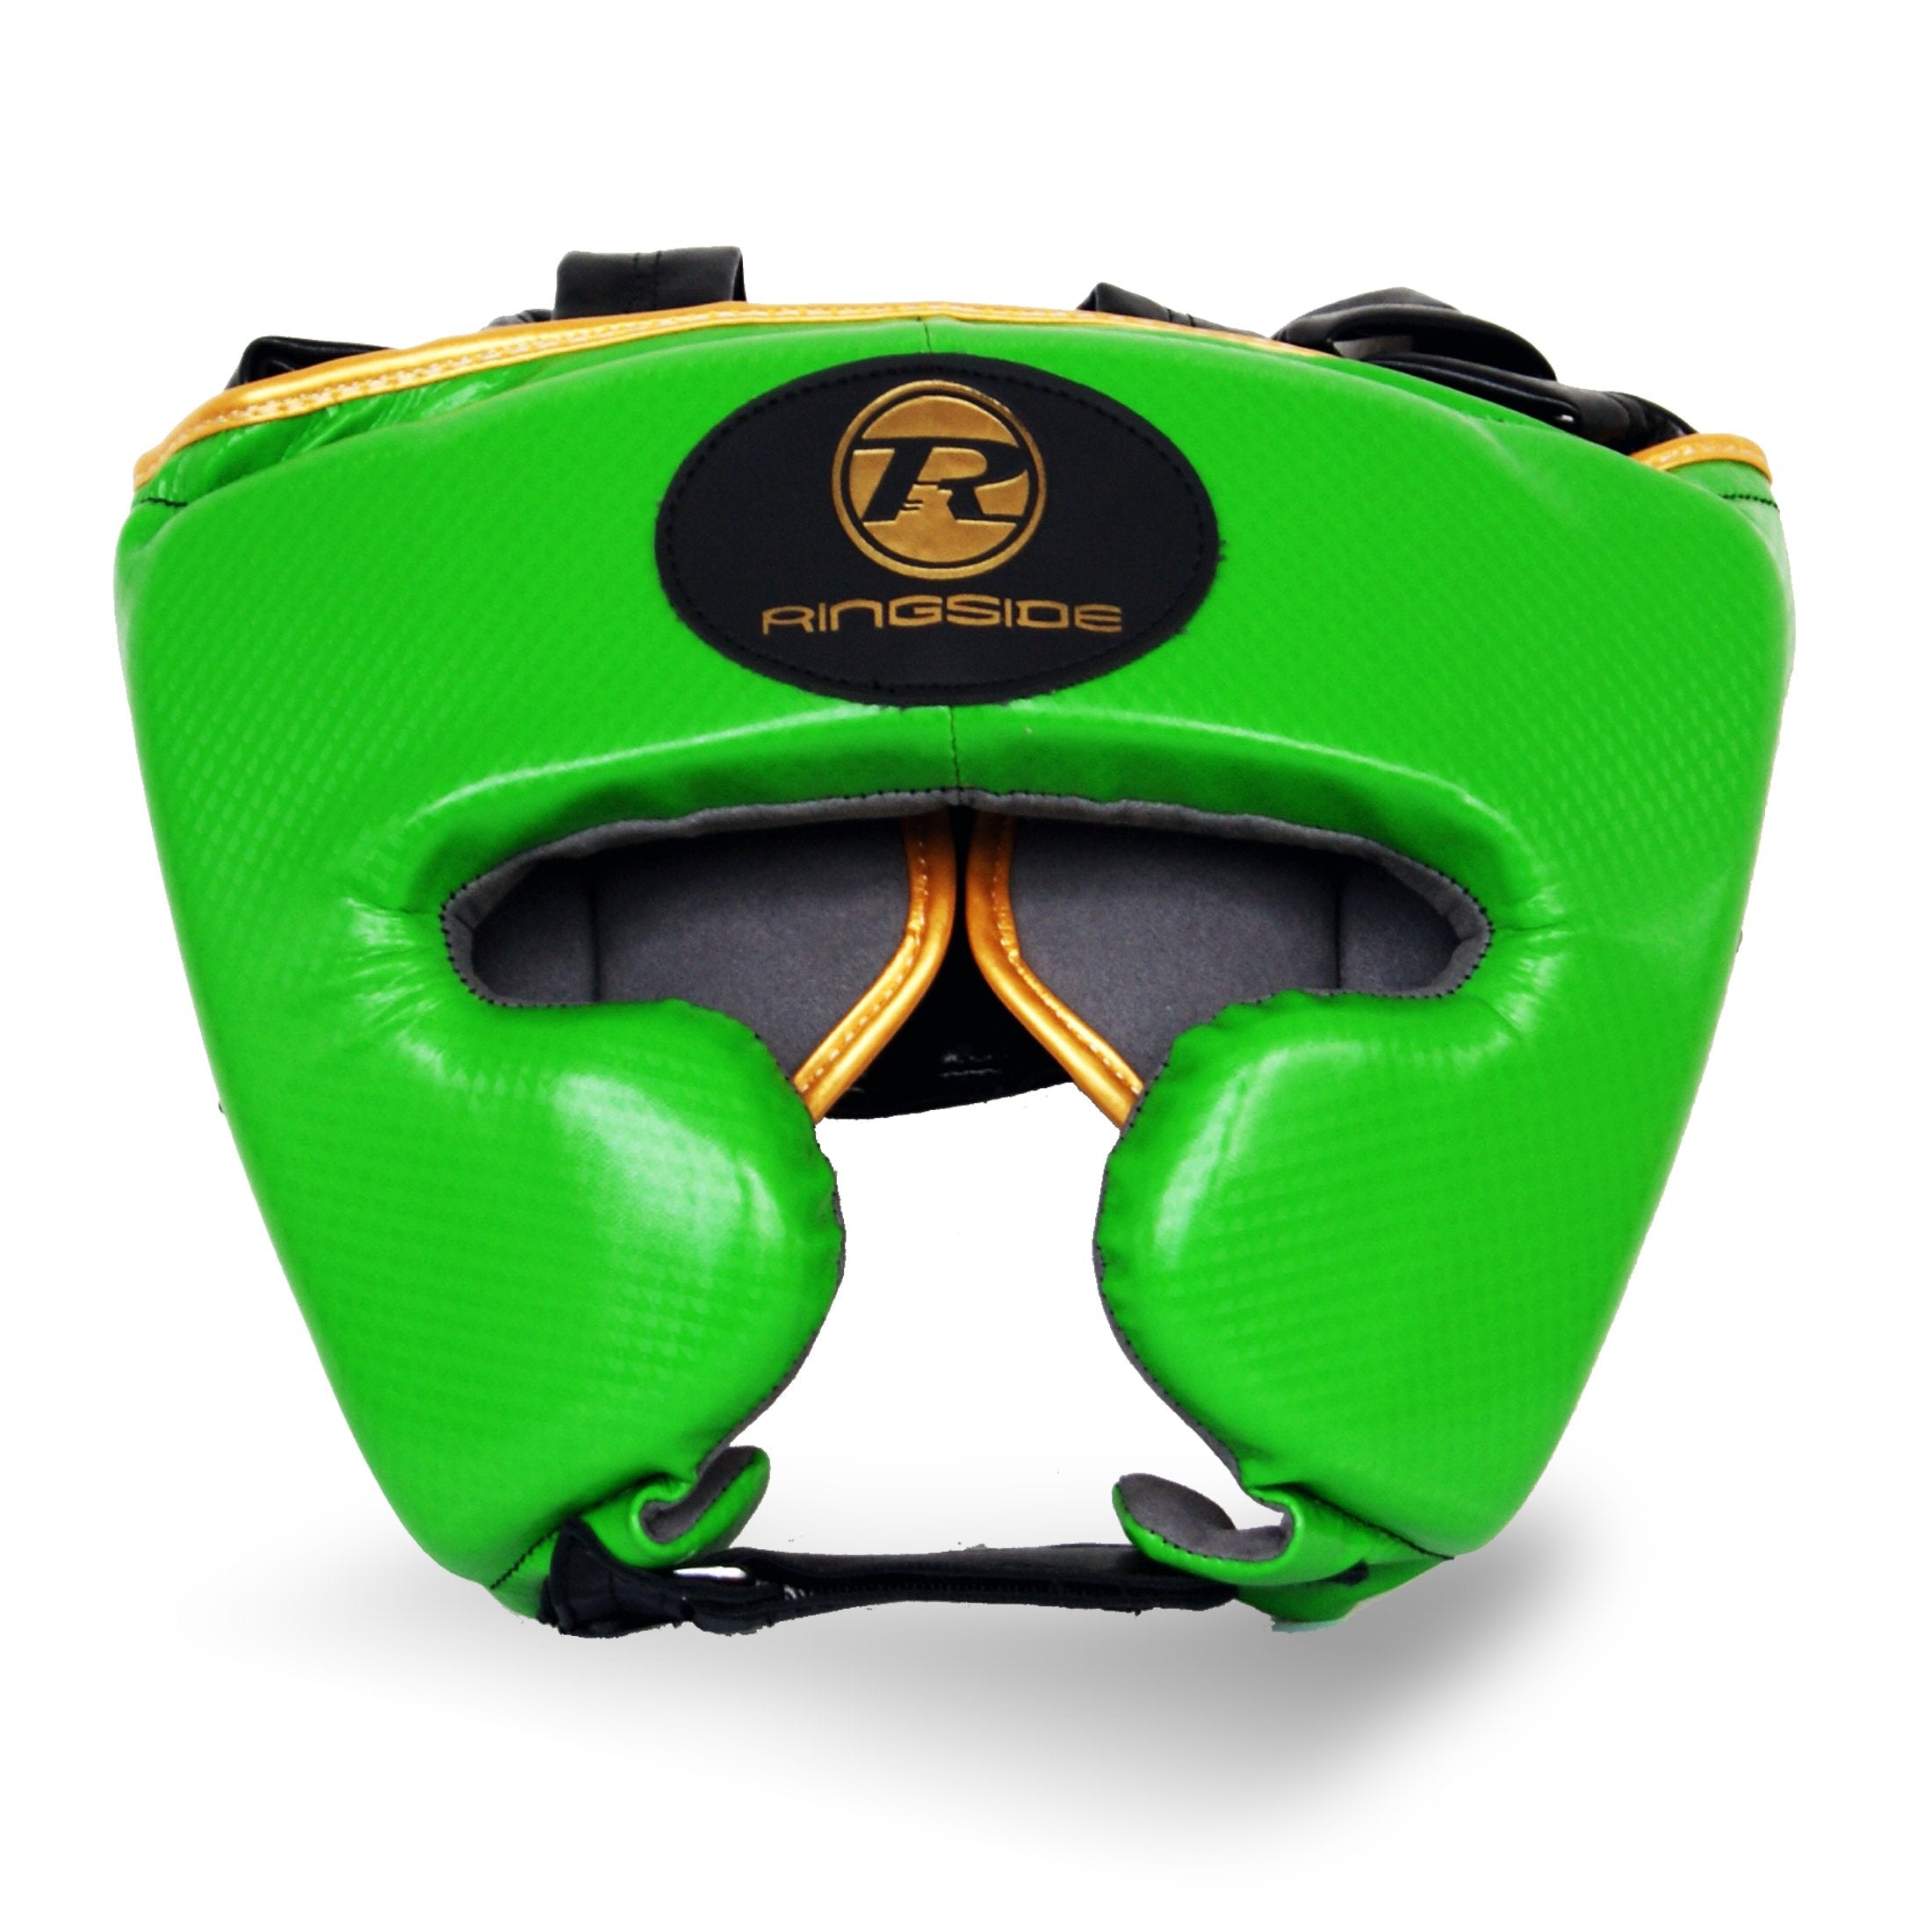 Pro Fitness Head Guard Synthetic Leather Metallic Green / Black / Gold